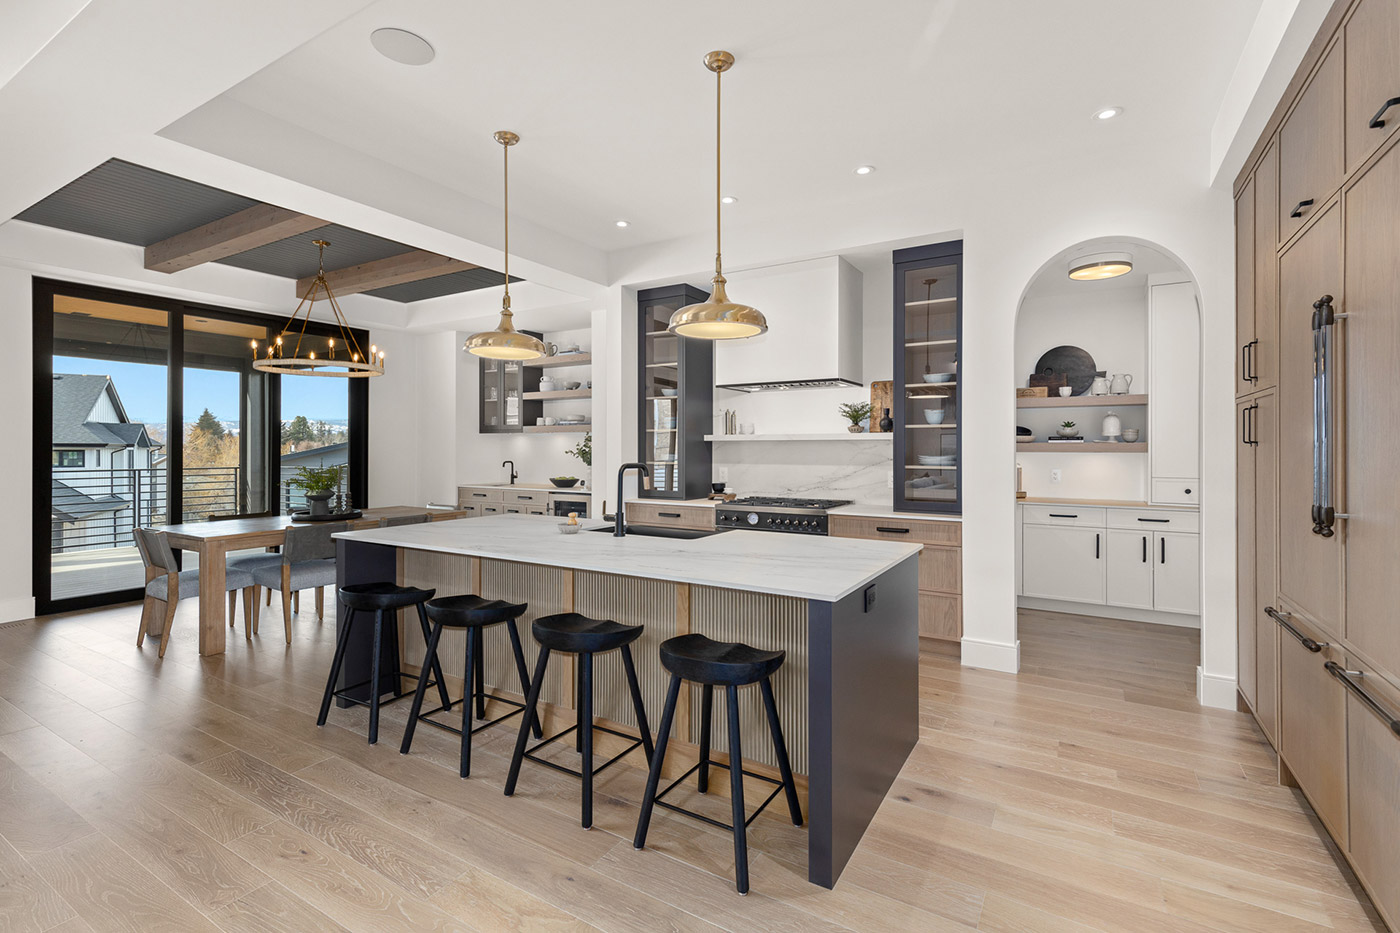 Align West Homes at The Orchard Kelowna